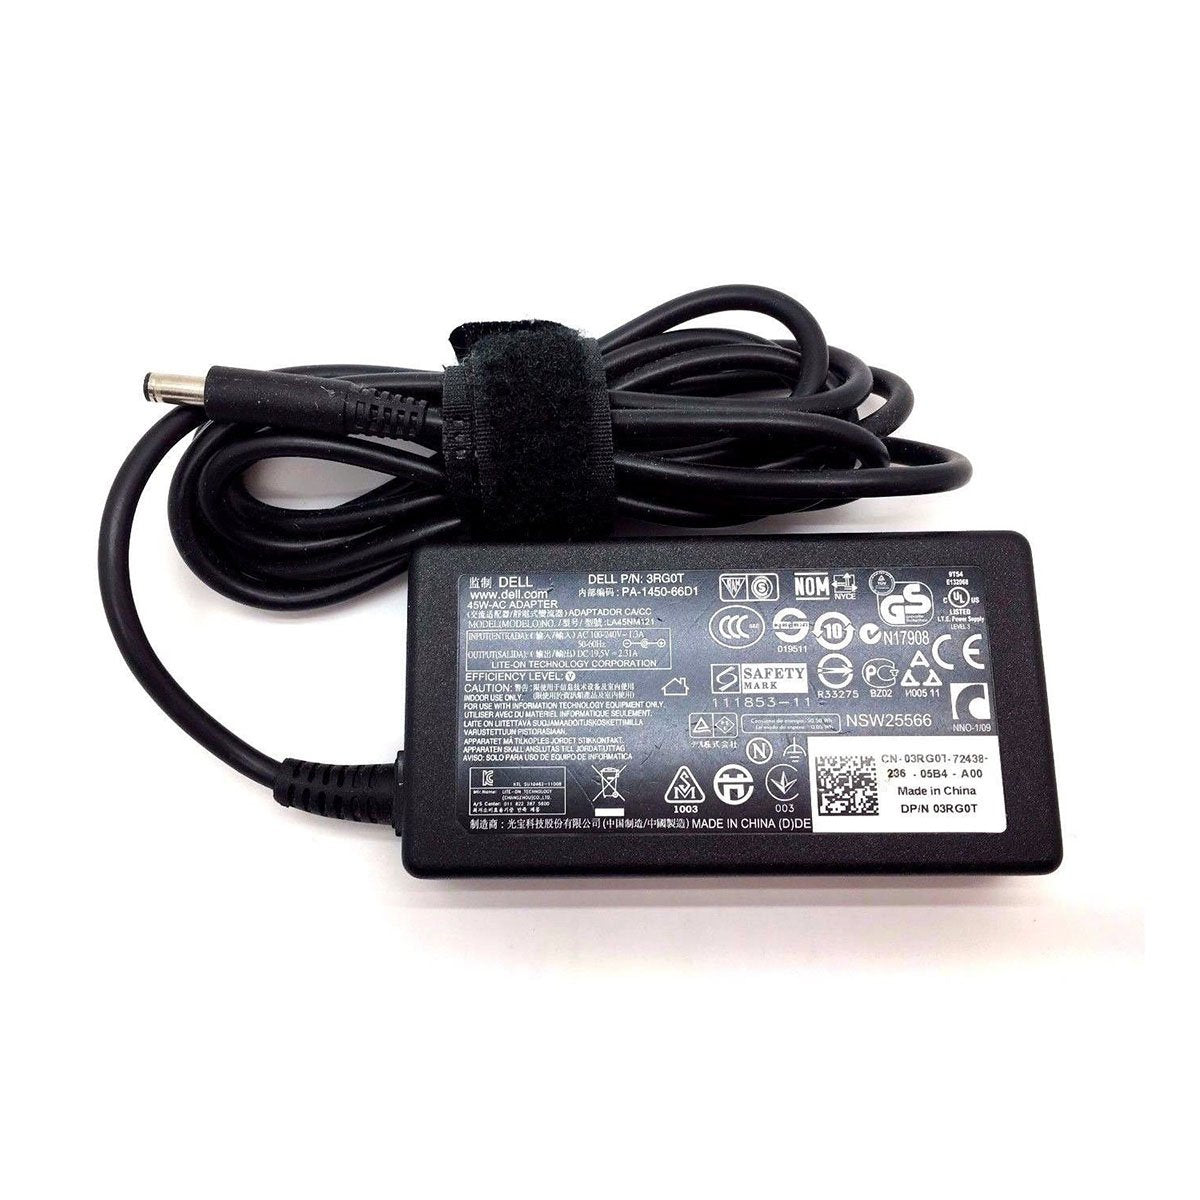 Dell Original 45W 19.5V 4.5mm Pin Laptop Charger Adapter for Inspiron 13 7359 With Power Cord